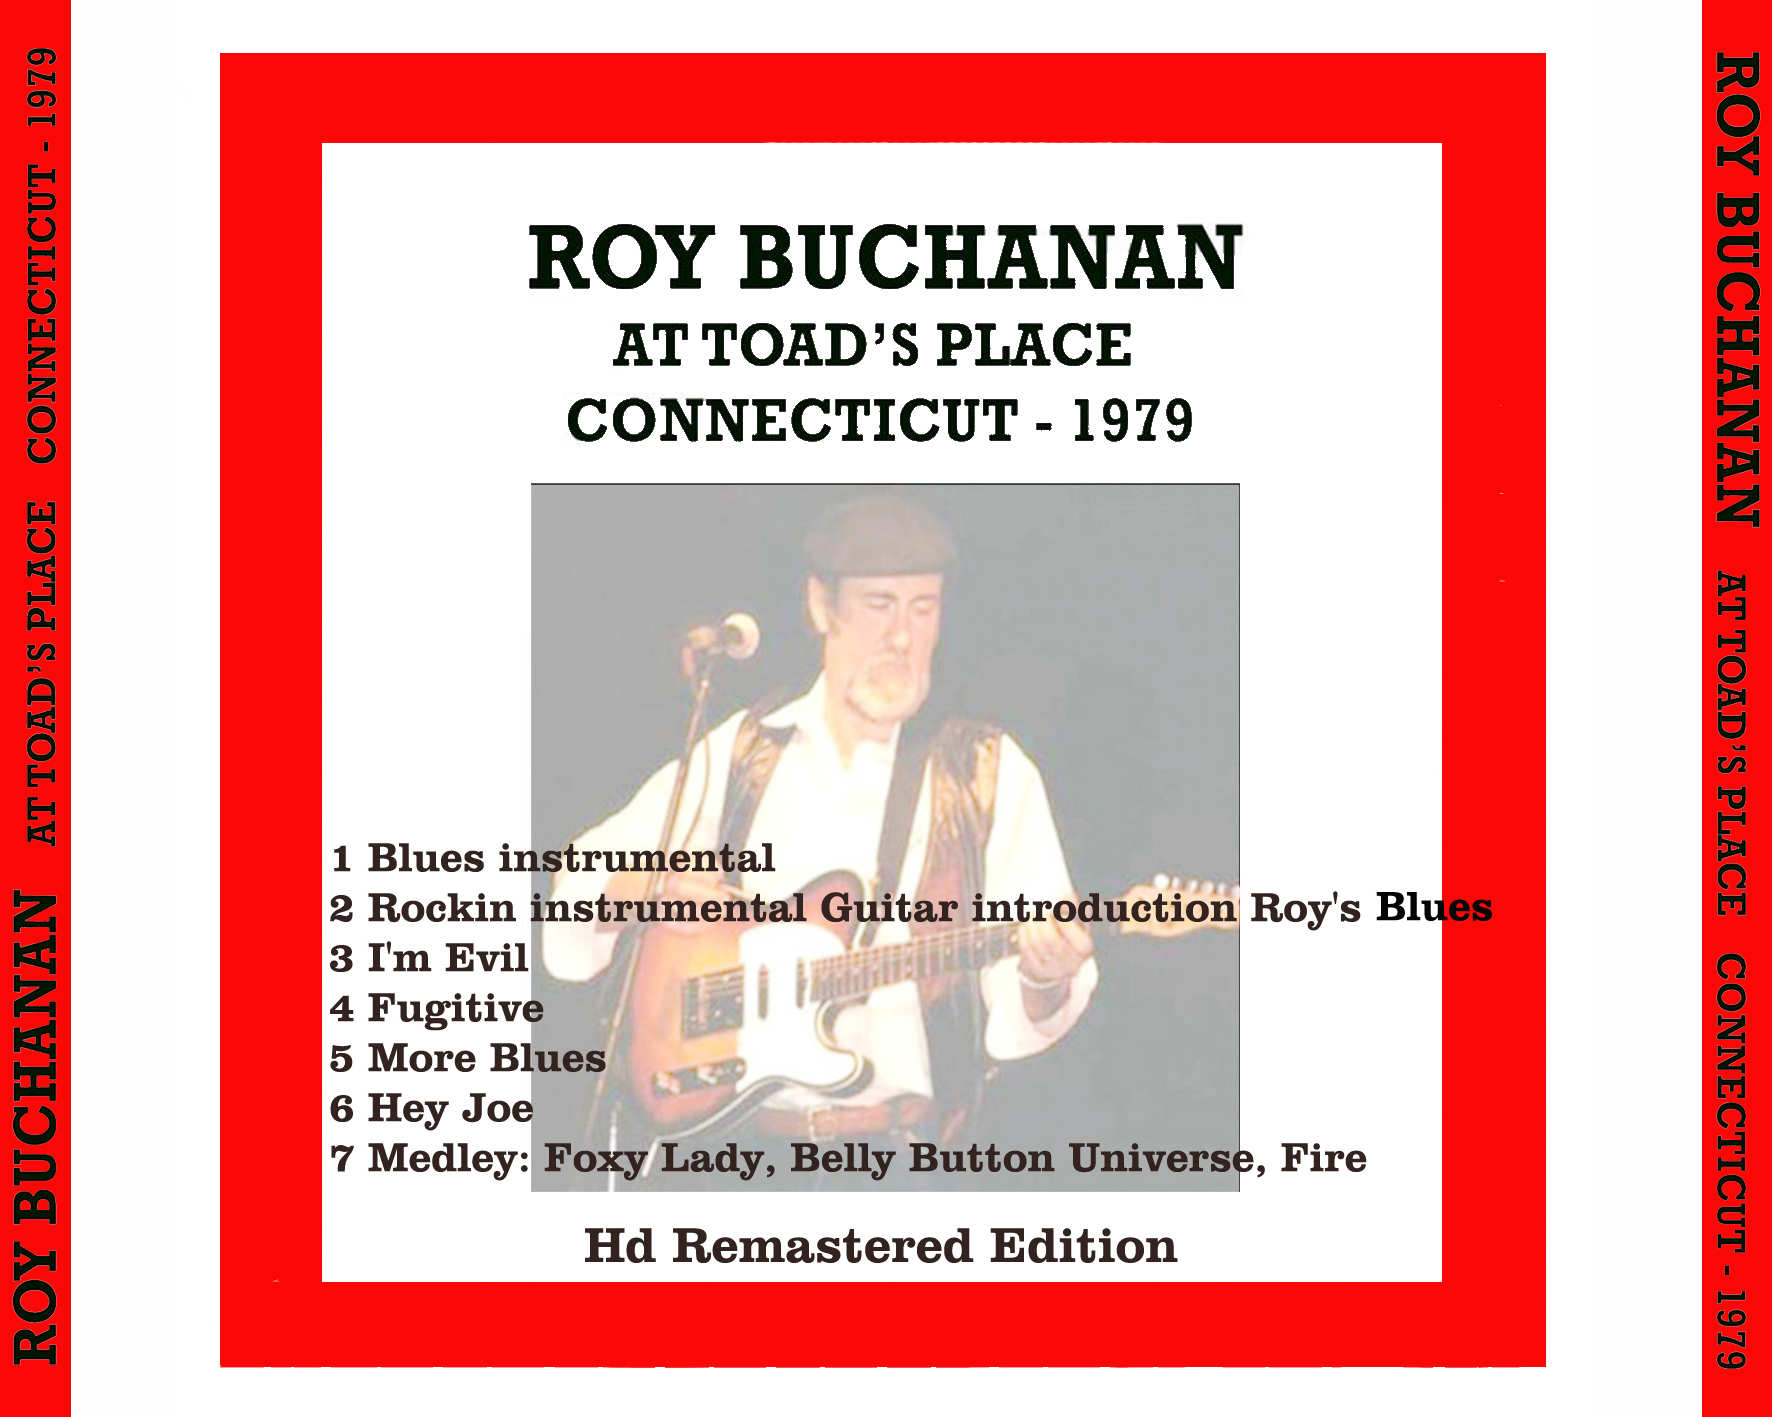 roy buchanan cdr toad's place connecticut 1979 tray